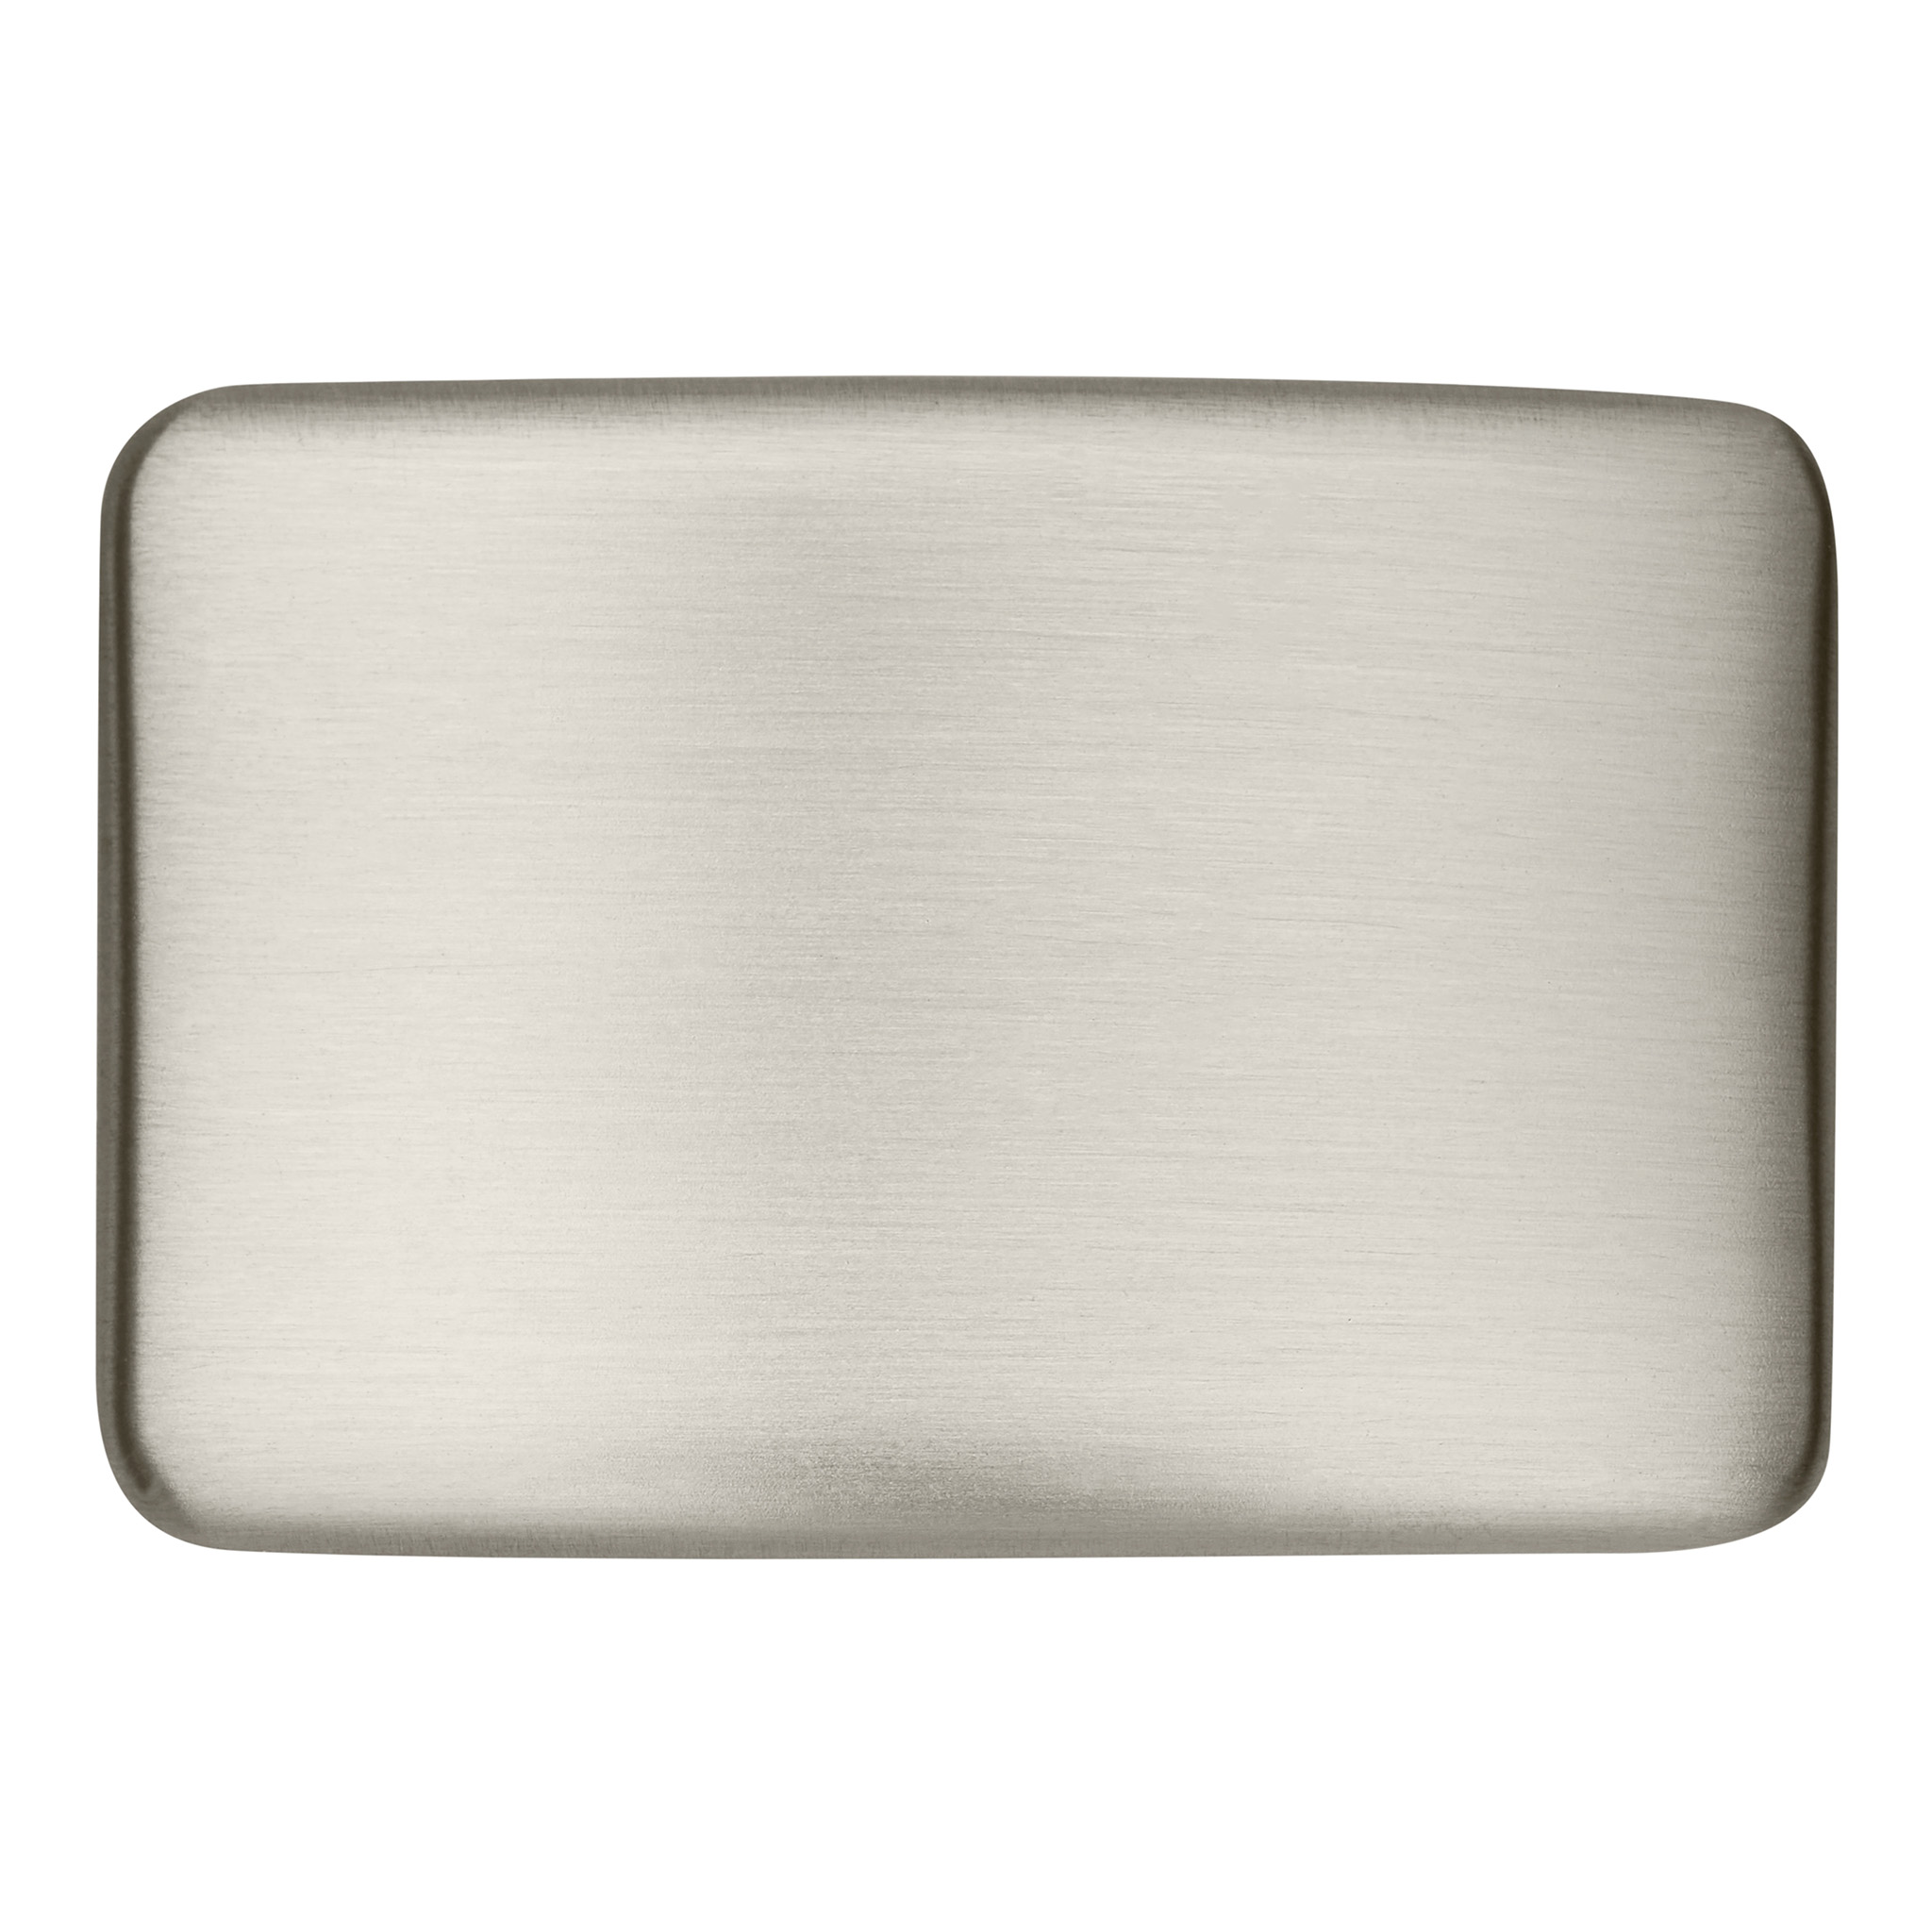 Tan Contemporary Knob, 34x23mm, Brushed Nickel